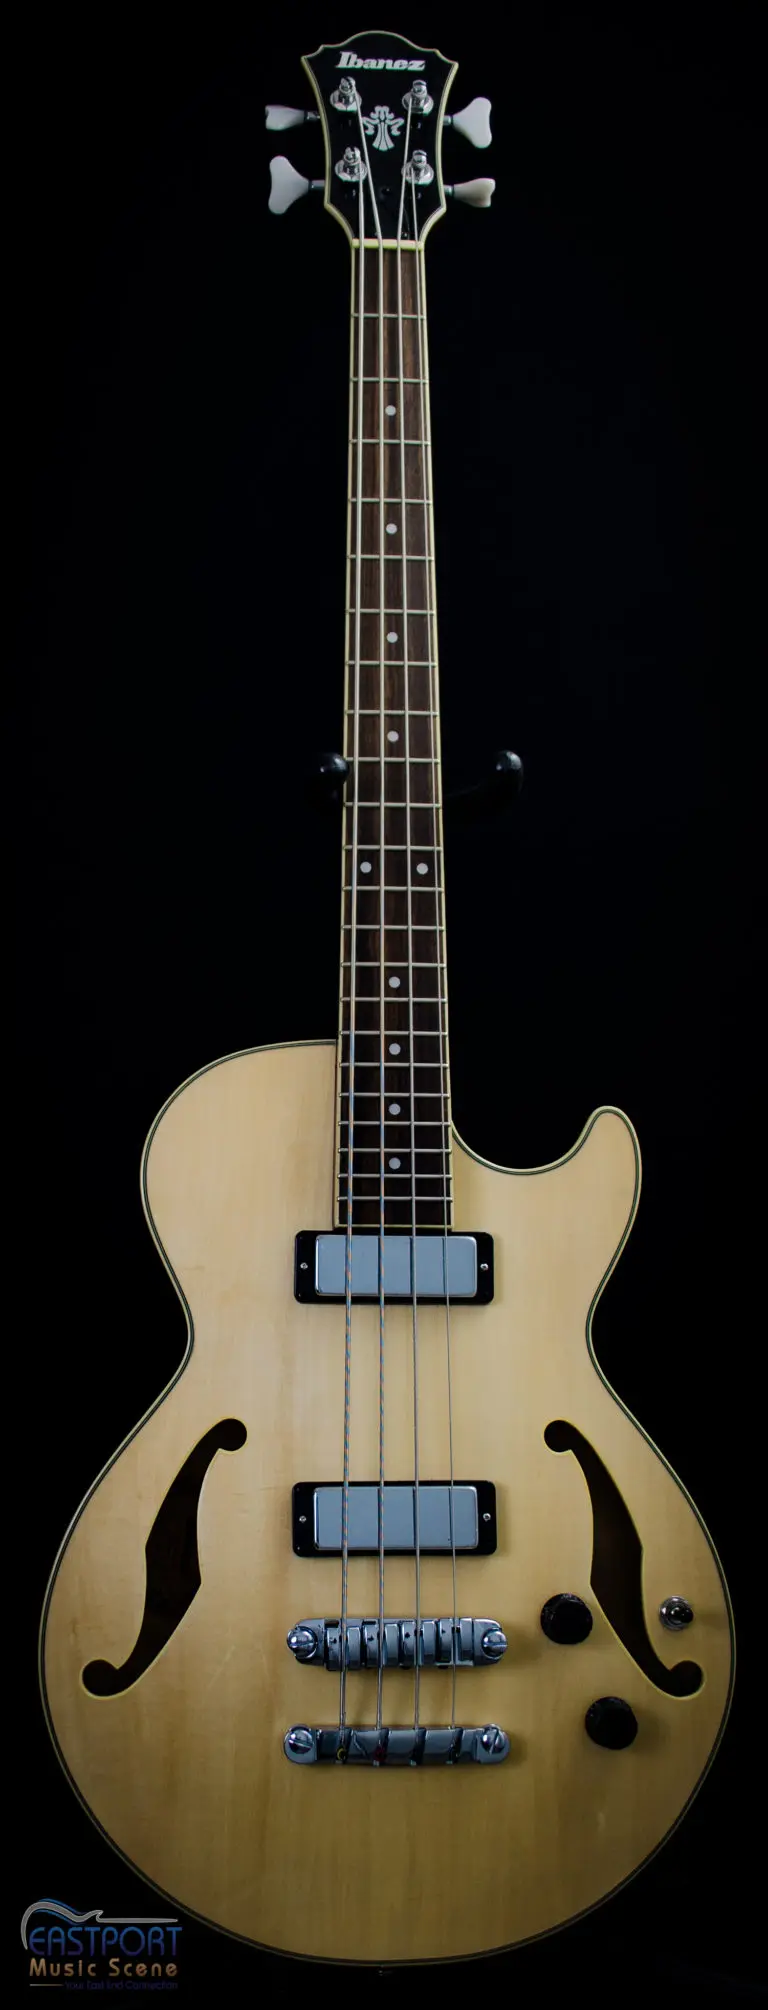 A guitar with four strings and two pickups.